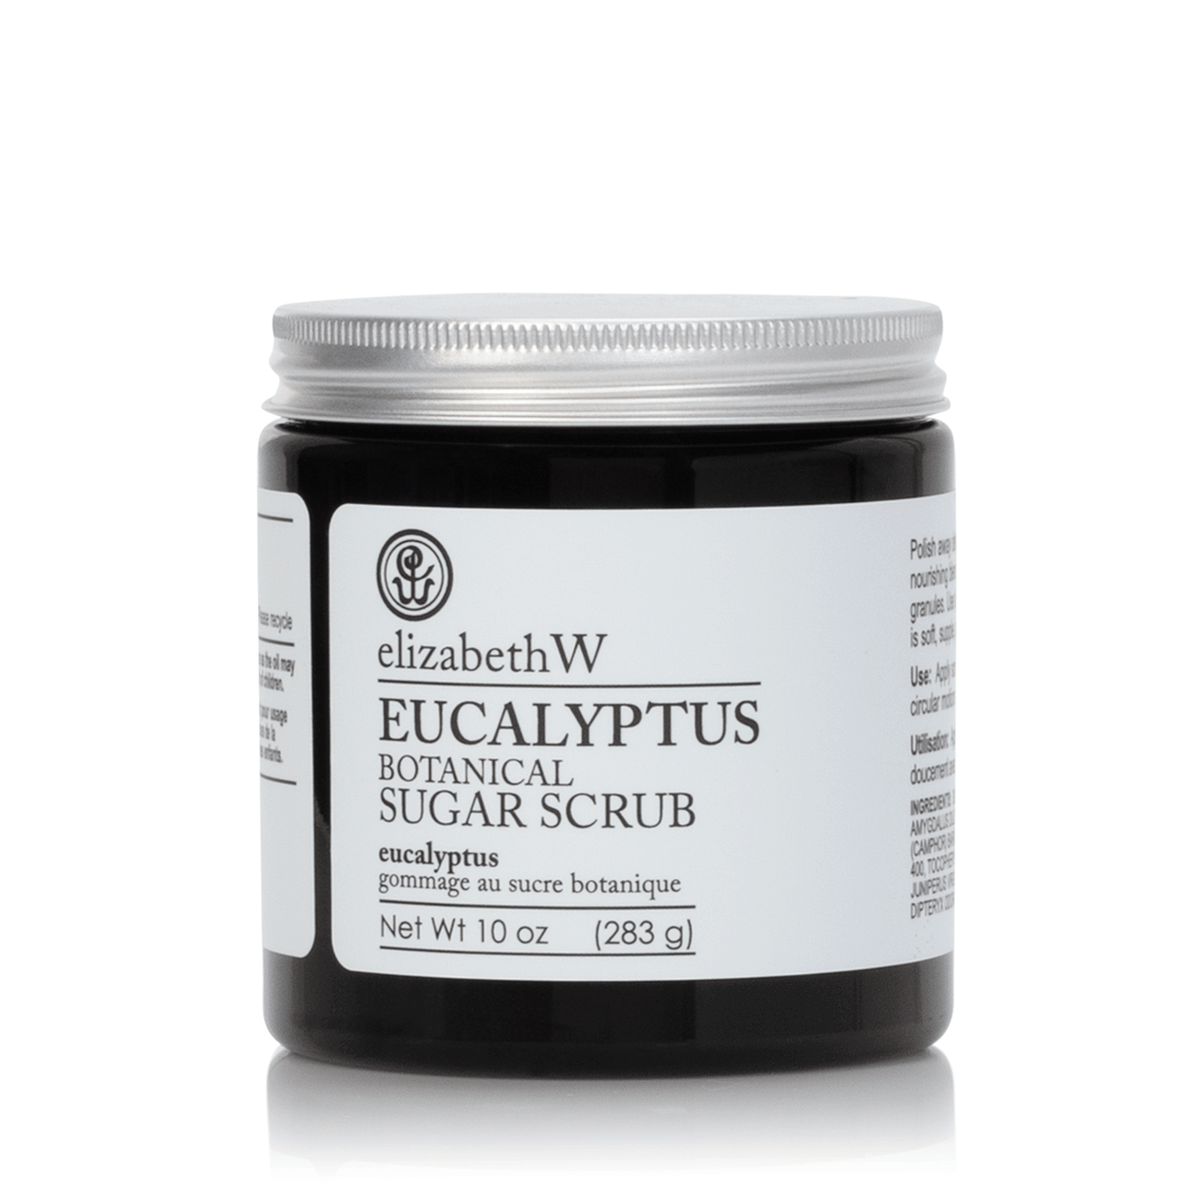 A jar of elizabeth W Purely Essential Eucalyptus Sugar Scrub on a white background. The label includes product details and net weight of 10 oz (283 g).